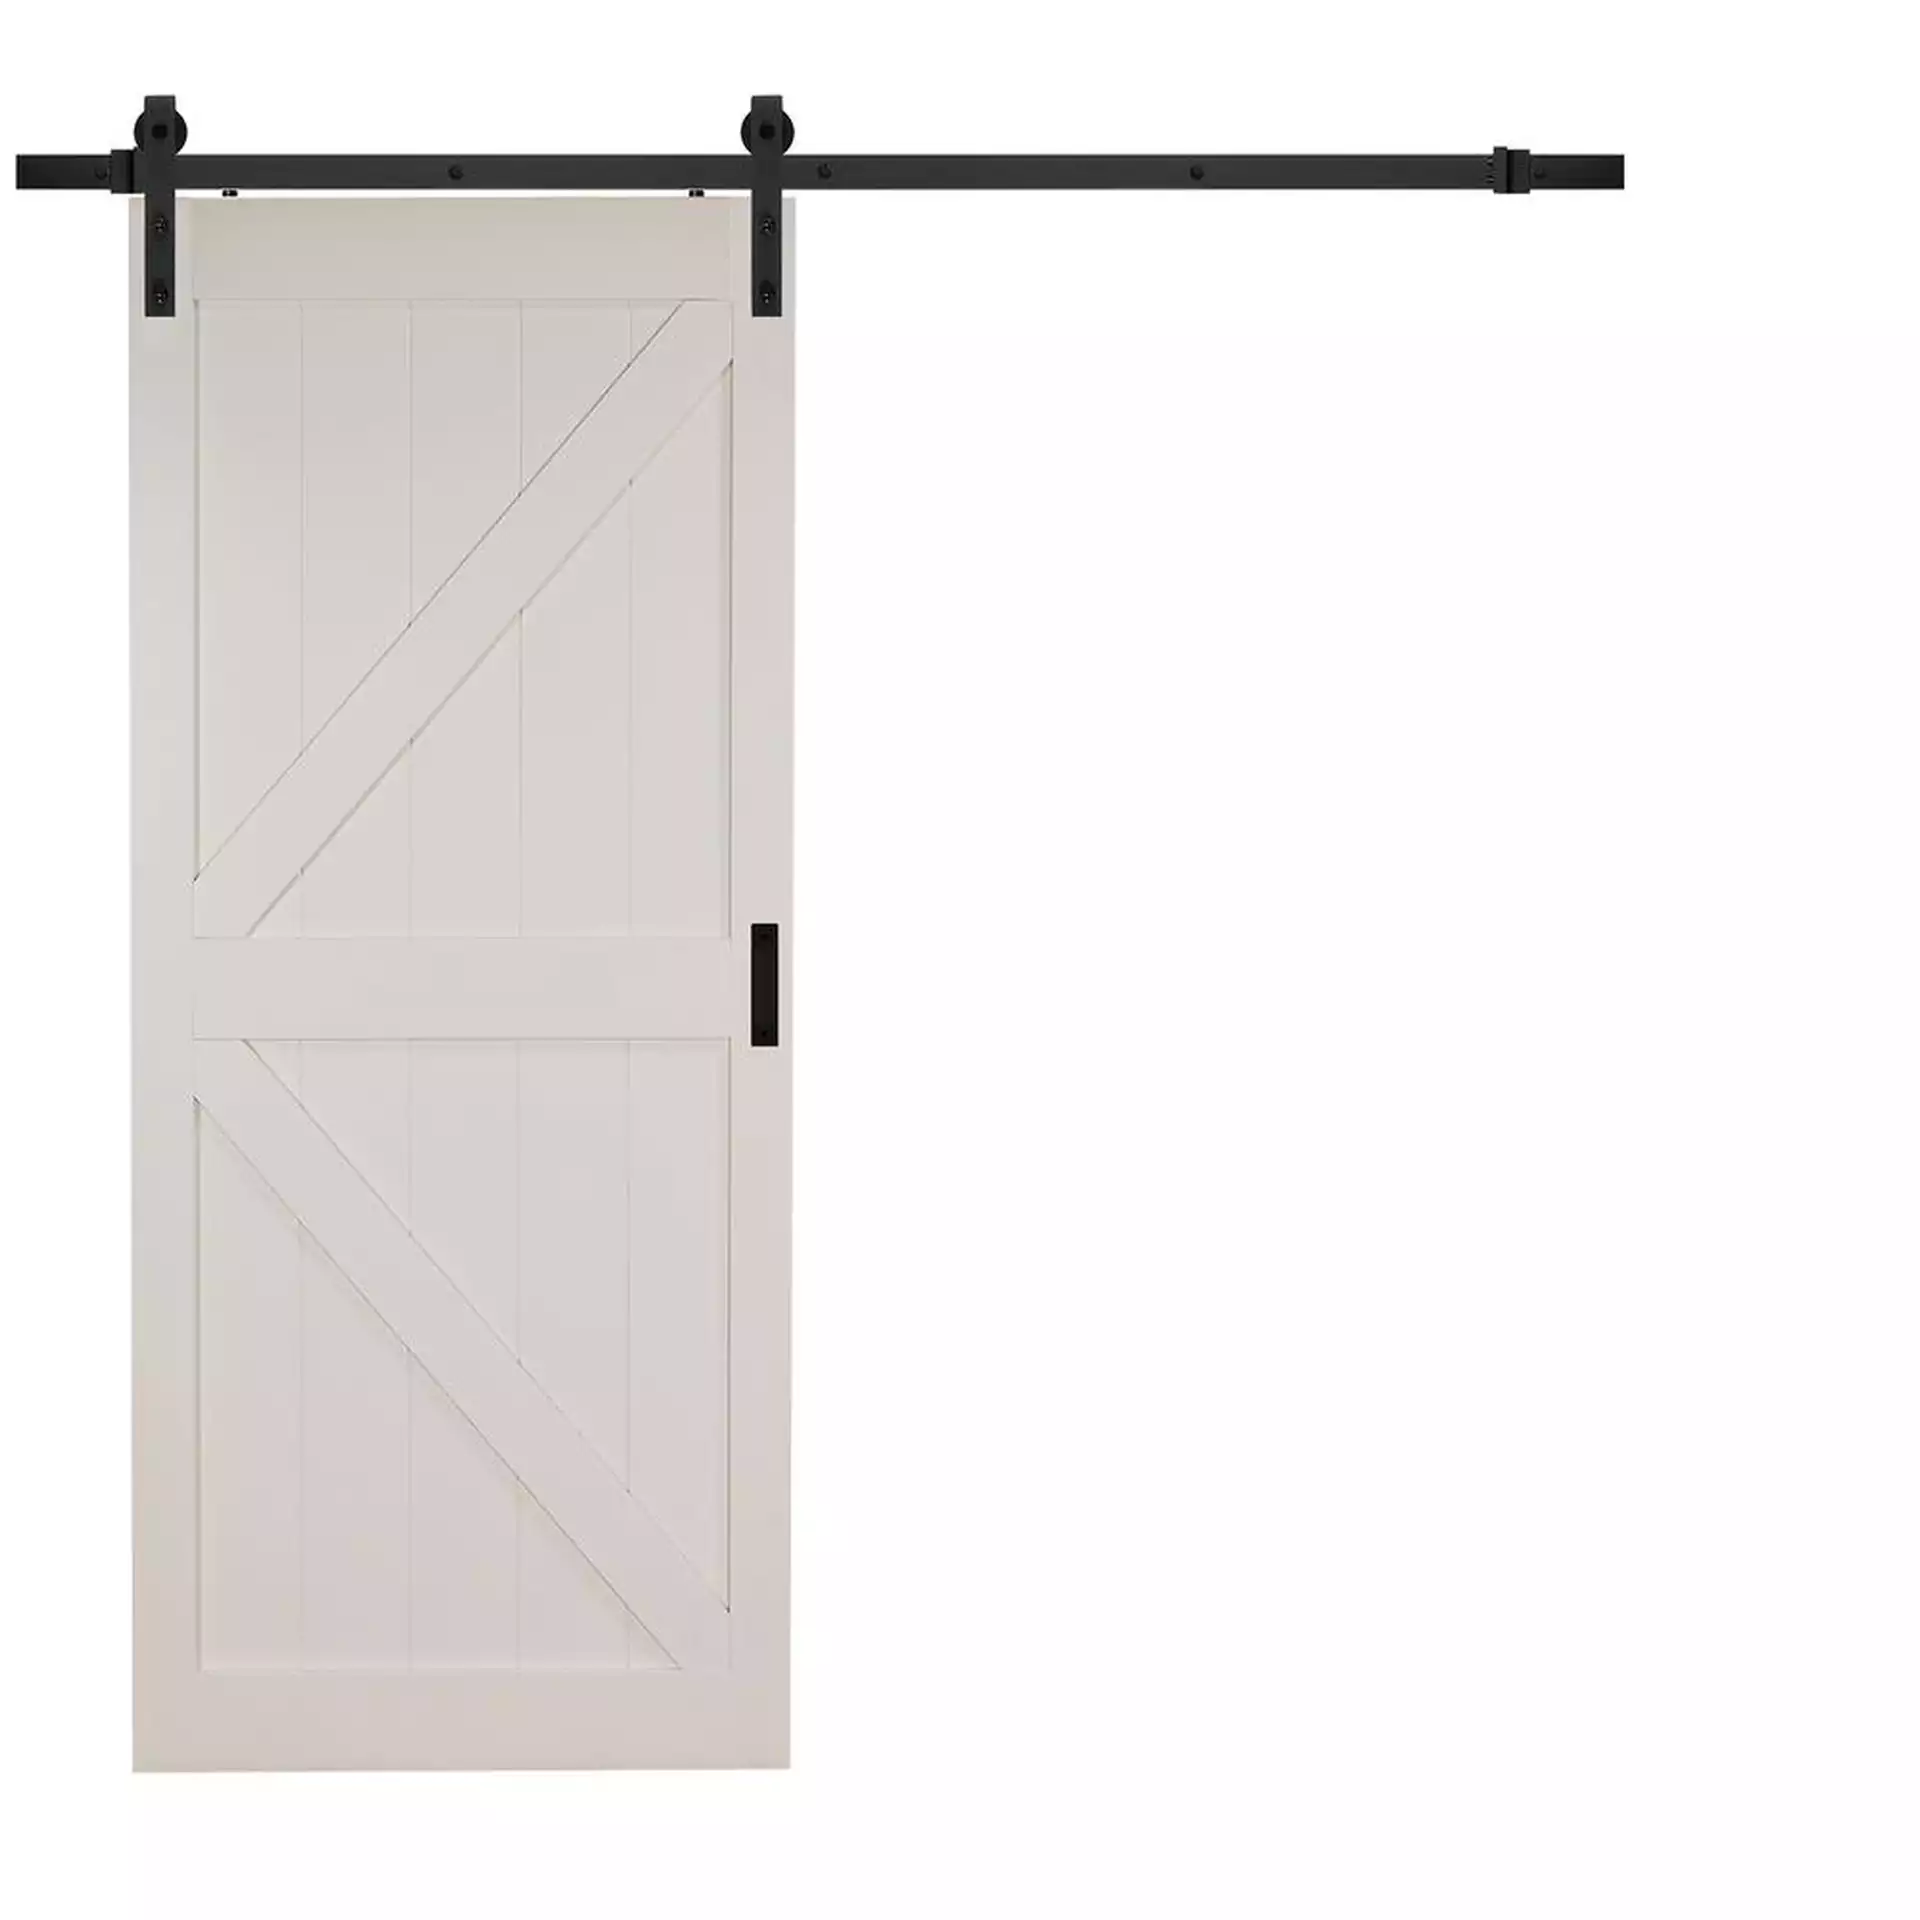 TRUporte 36 in. x 84 in. Off-White K Design Solid Core Interior Barn Door with Rustic Hardware Kit, Off White